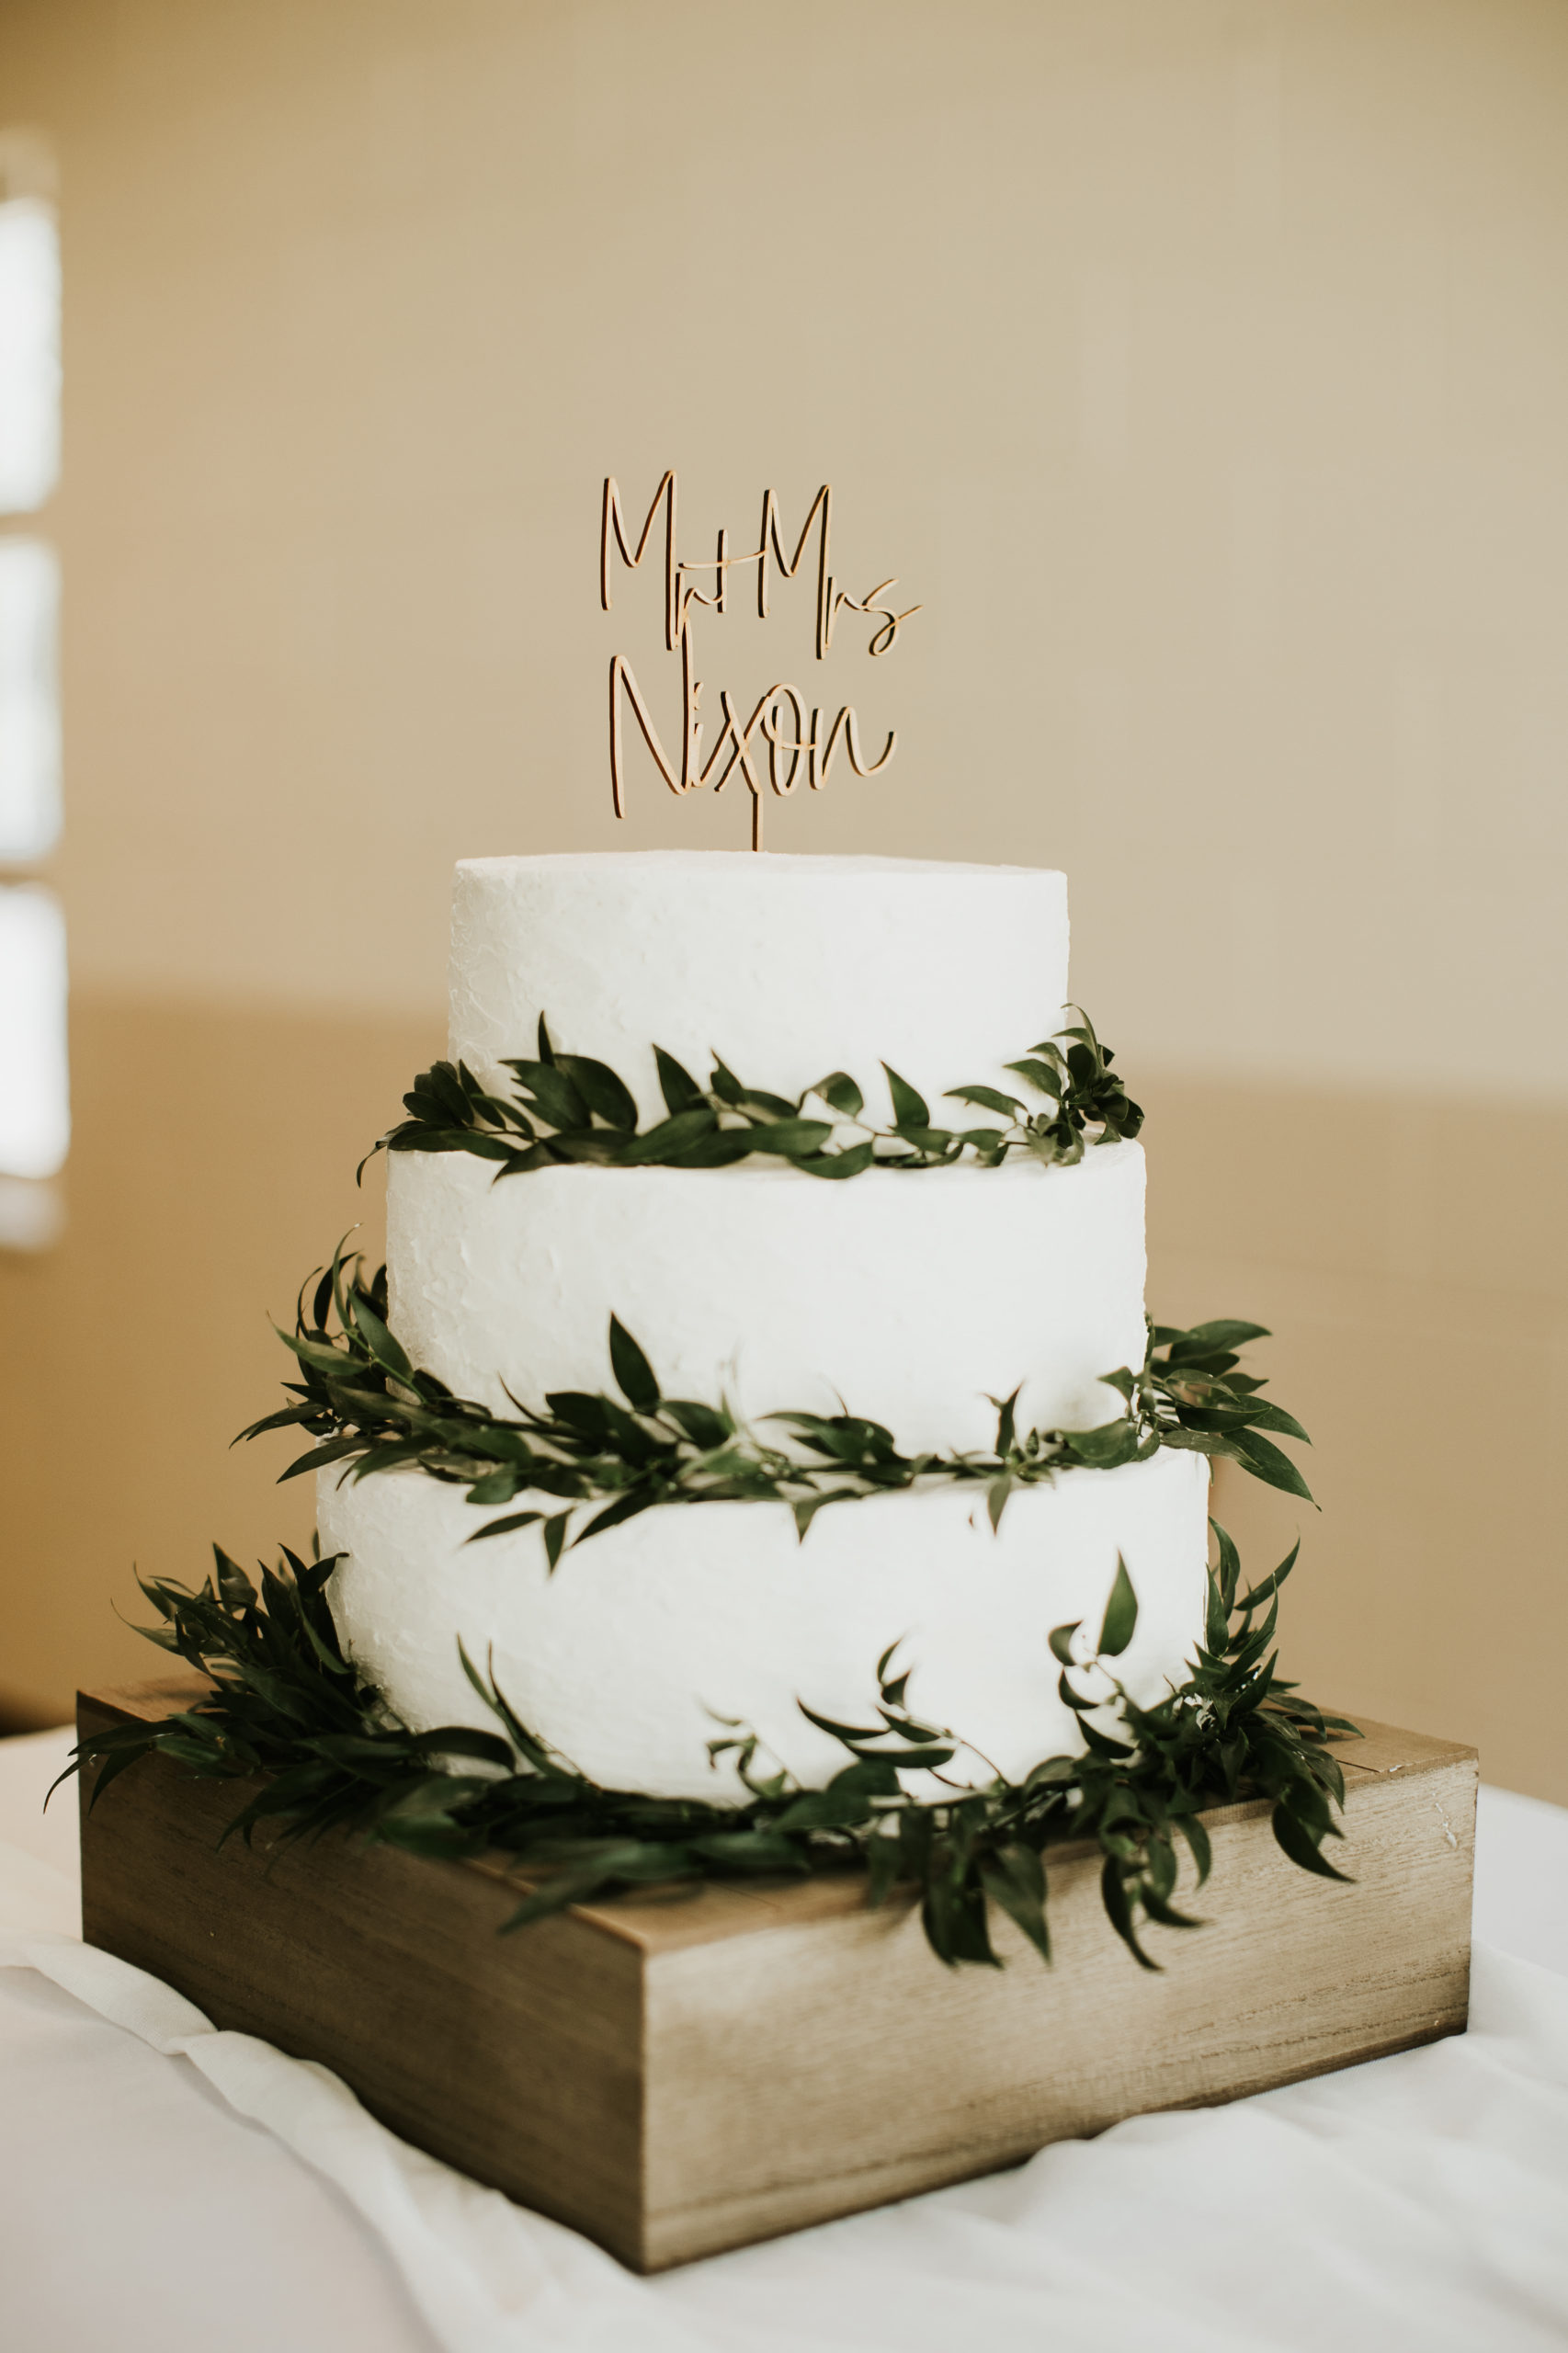 A beautiful 3-tier custom wedding cake with a rustic texture and fresh greenery from Village Patisserie in Toledo, Ohio